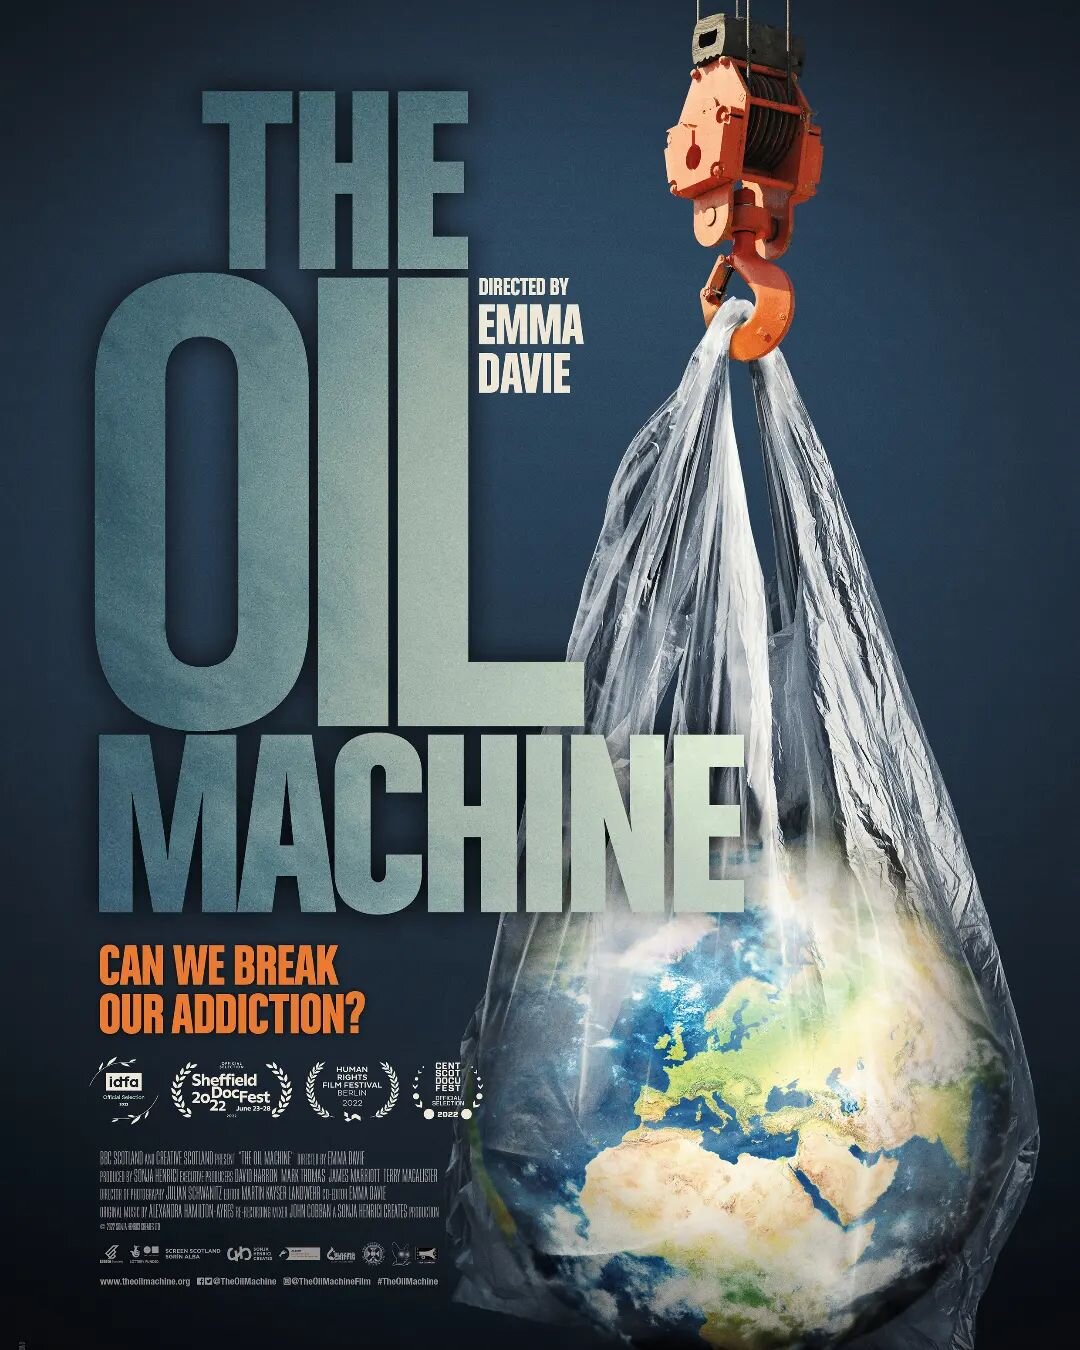 Film screening tonight, with discussion afterwards! 7.30pm at the YHA Granary, first floor. Bring a reusable cup if you have one for a drink, and join us, we would love to see you there.

The Oil Machine is a new documentary film that looks at how th